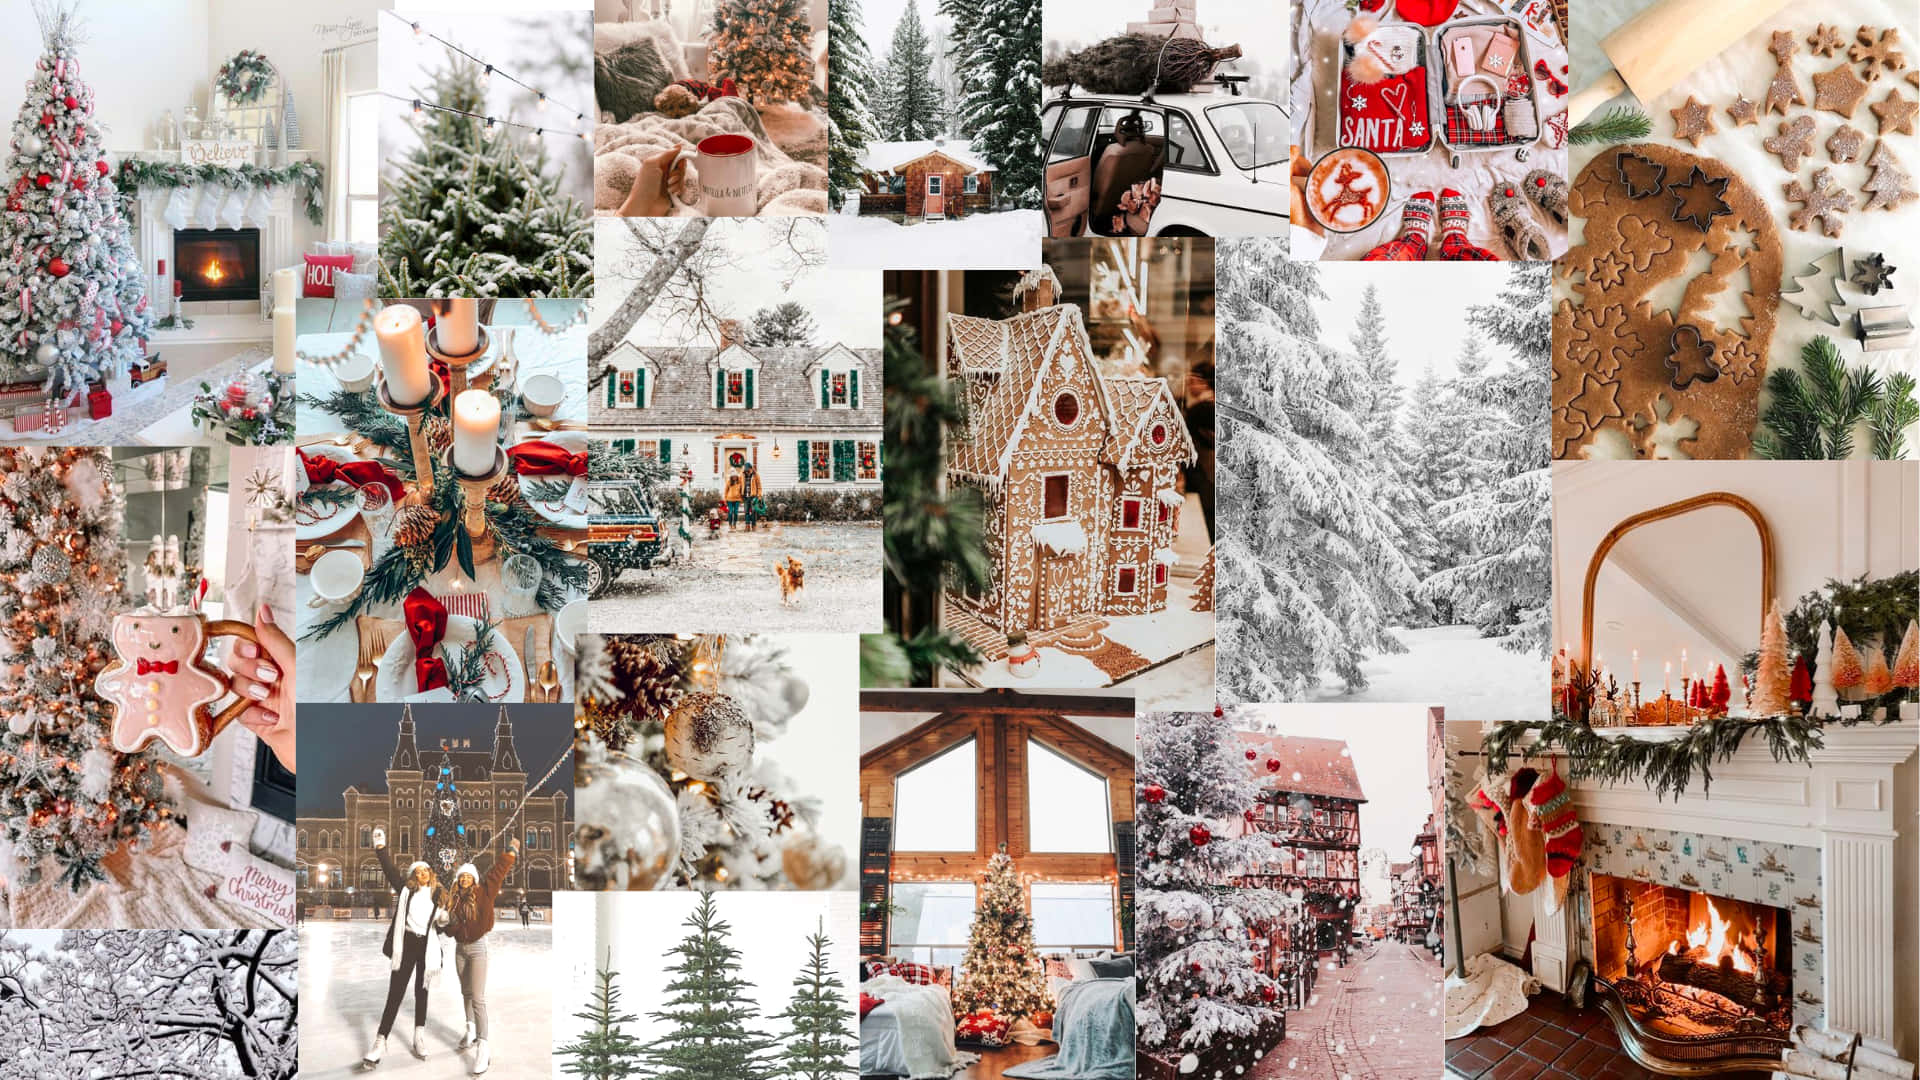 Christmas Collage With Christmas Trees And Decorations